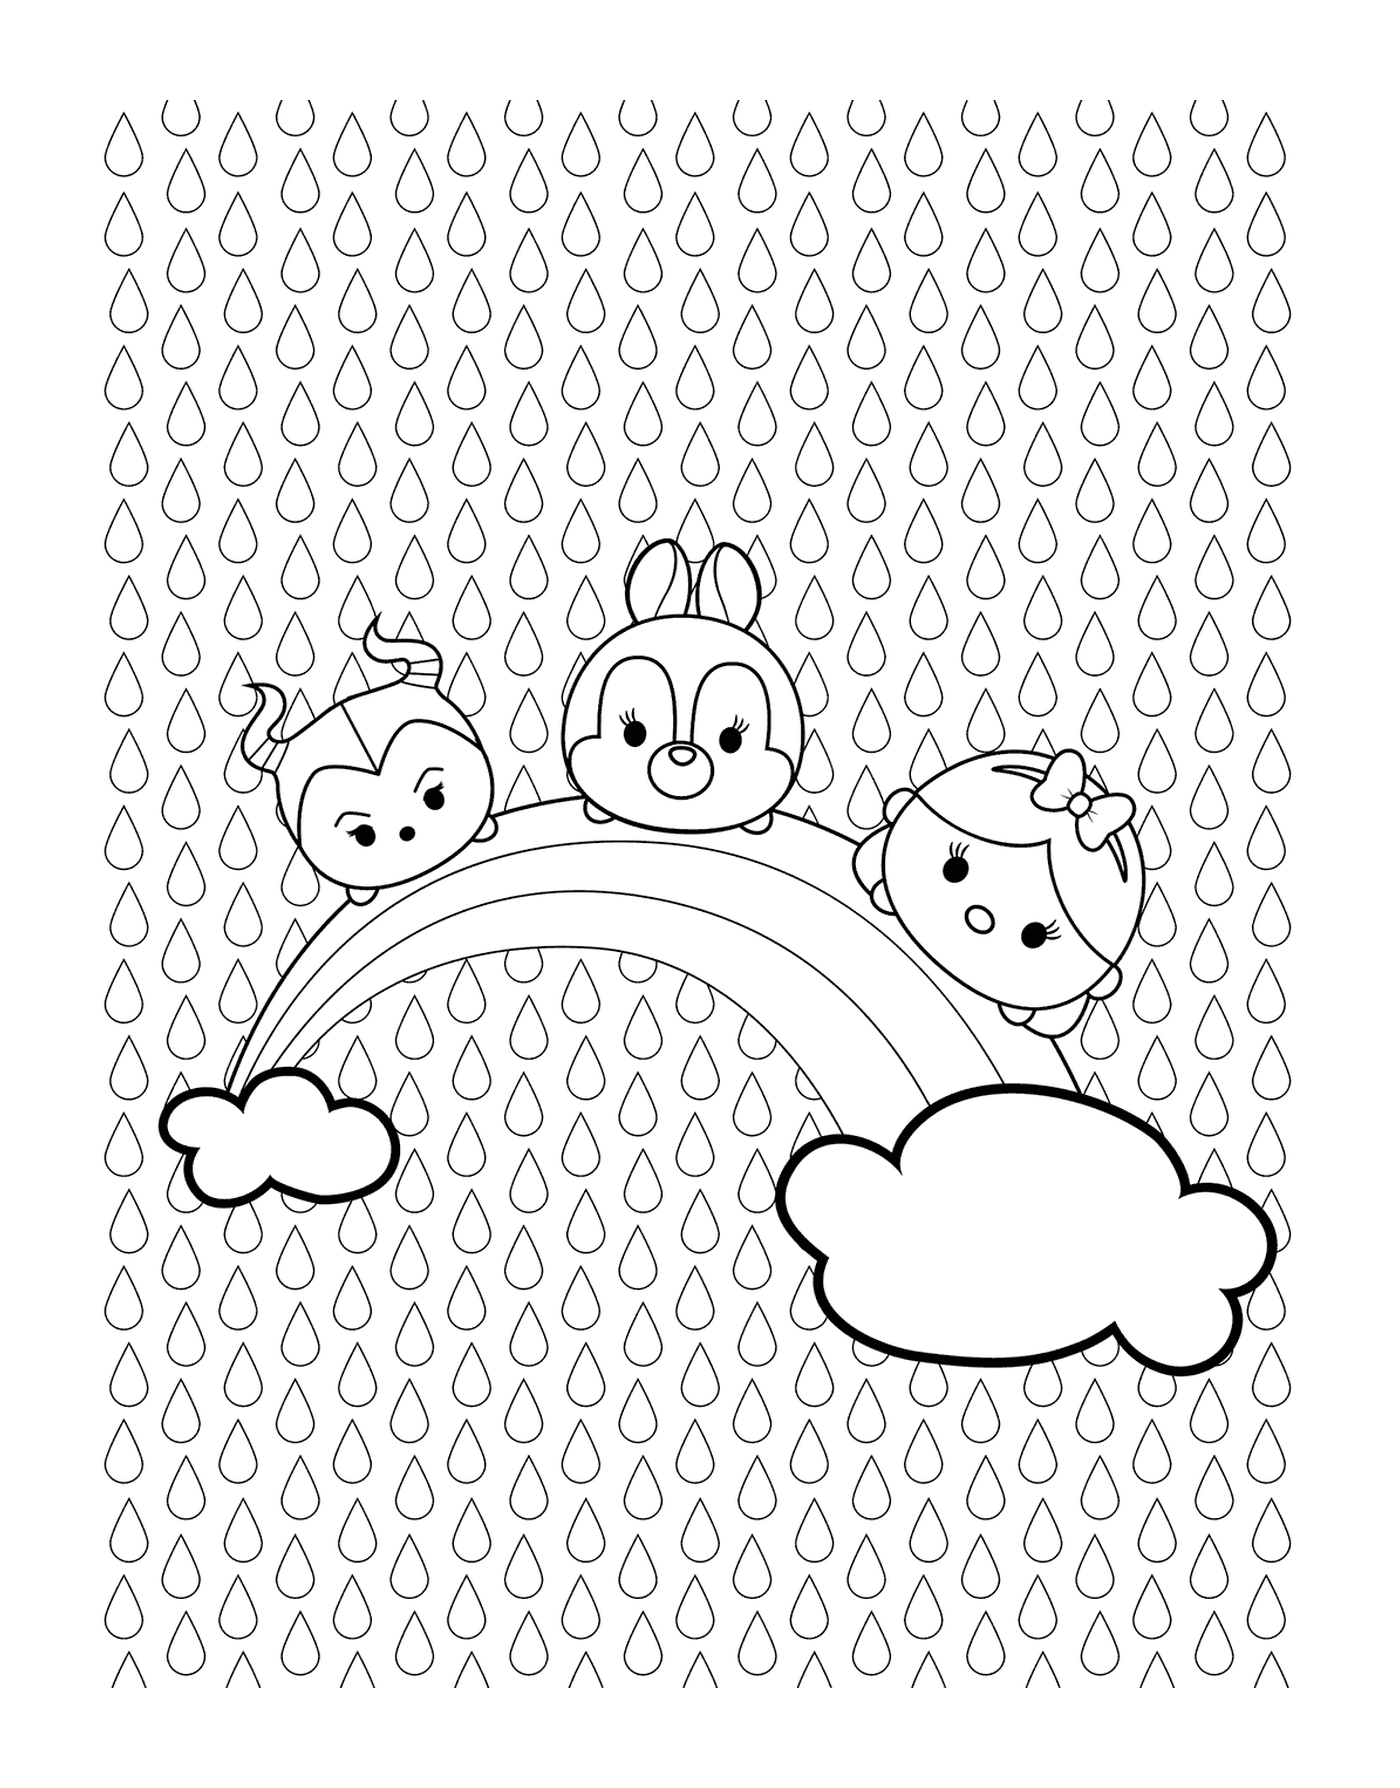  Full-page coloring Tsum Tsum 